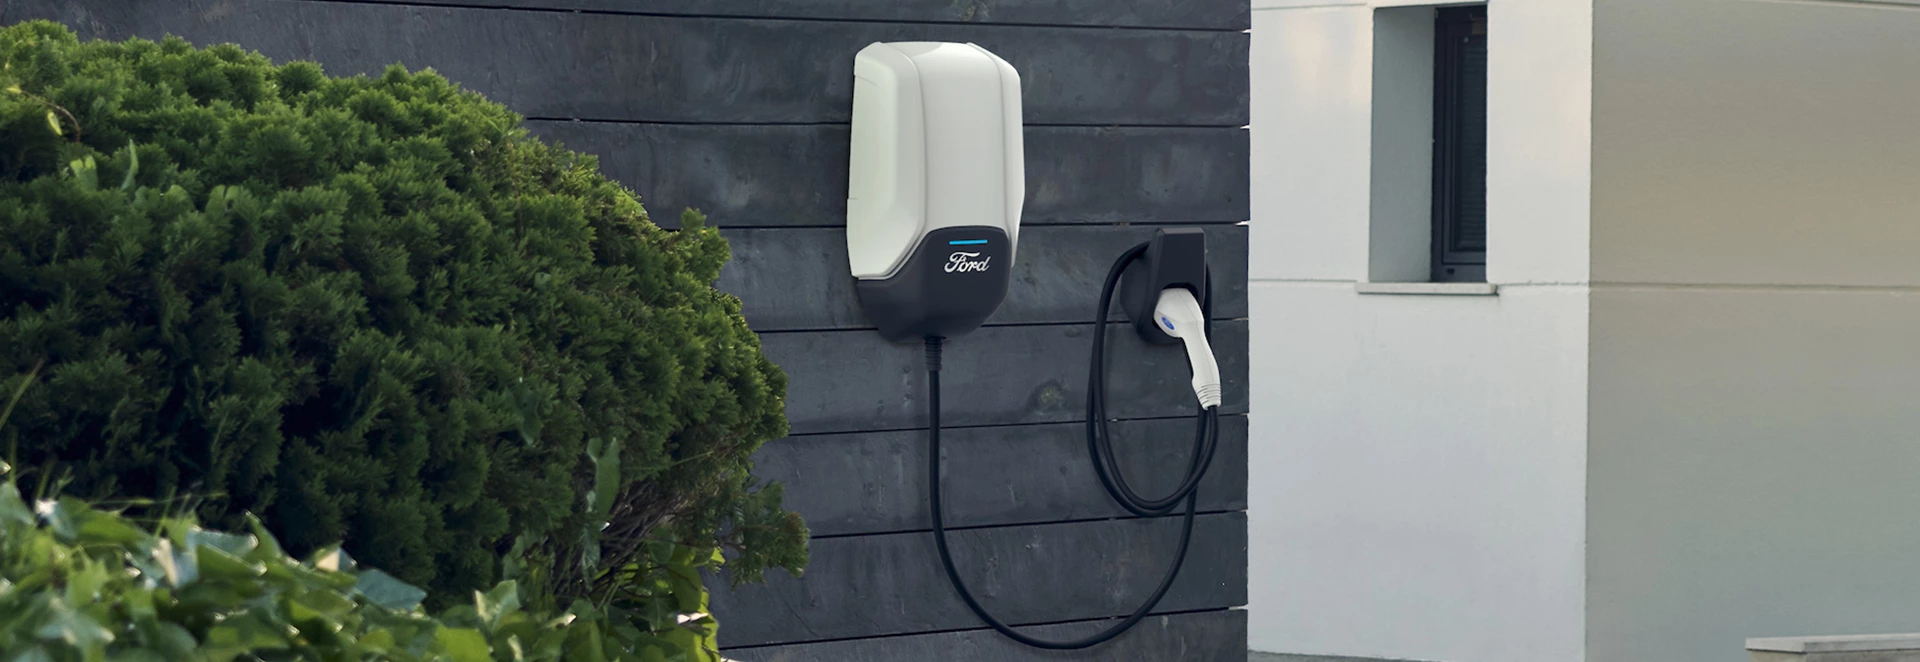 Ford announces ‘Charging Solutions’ ecosystem for its plug-in vehicles